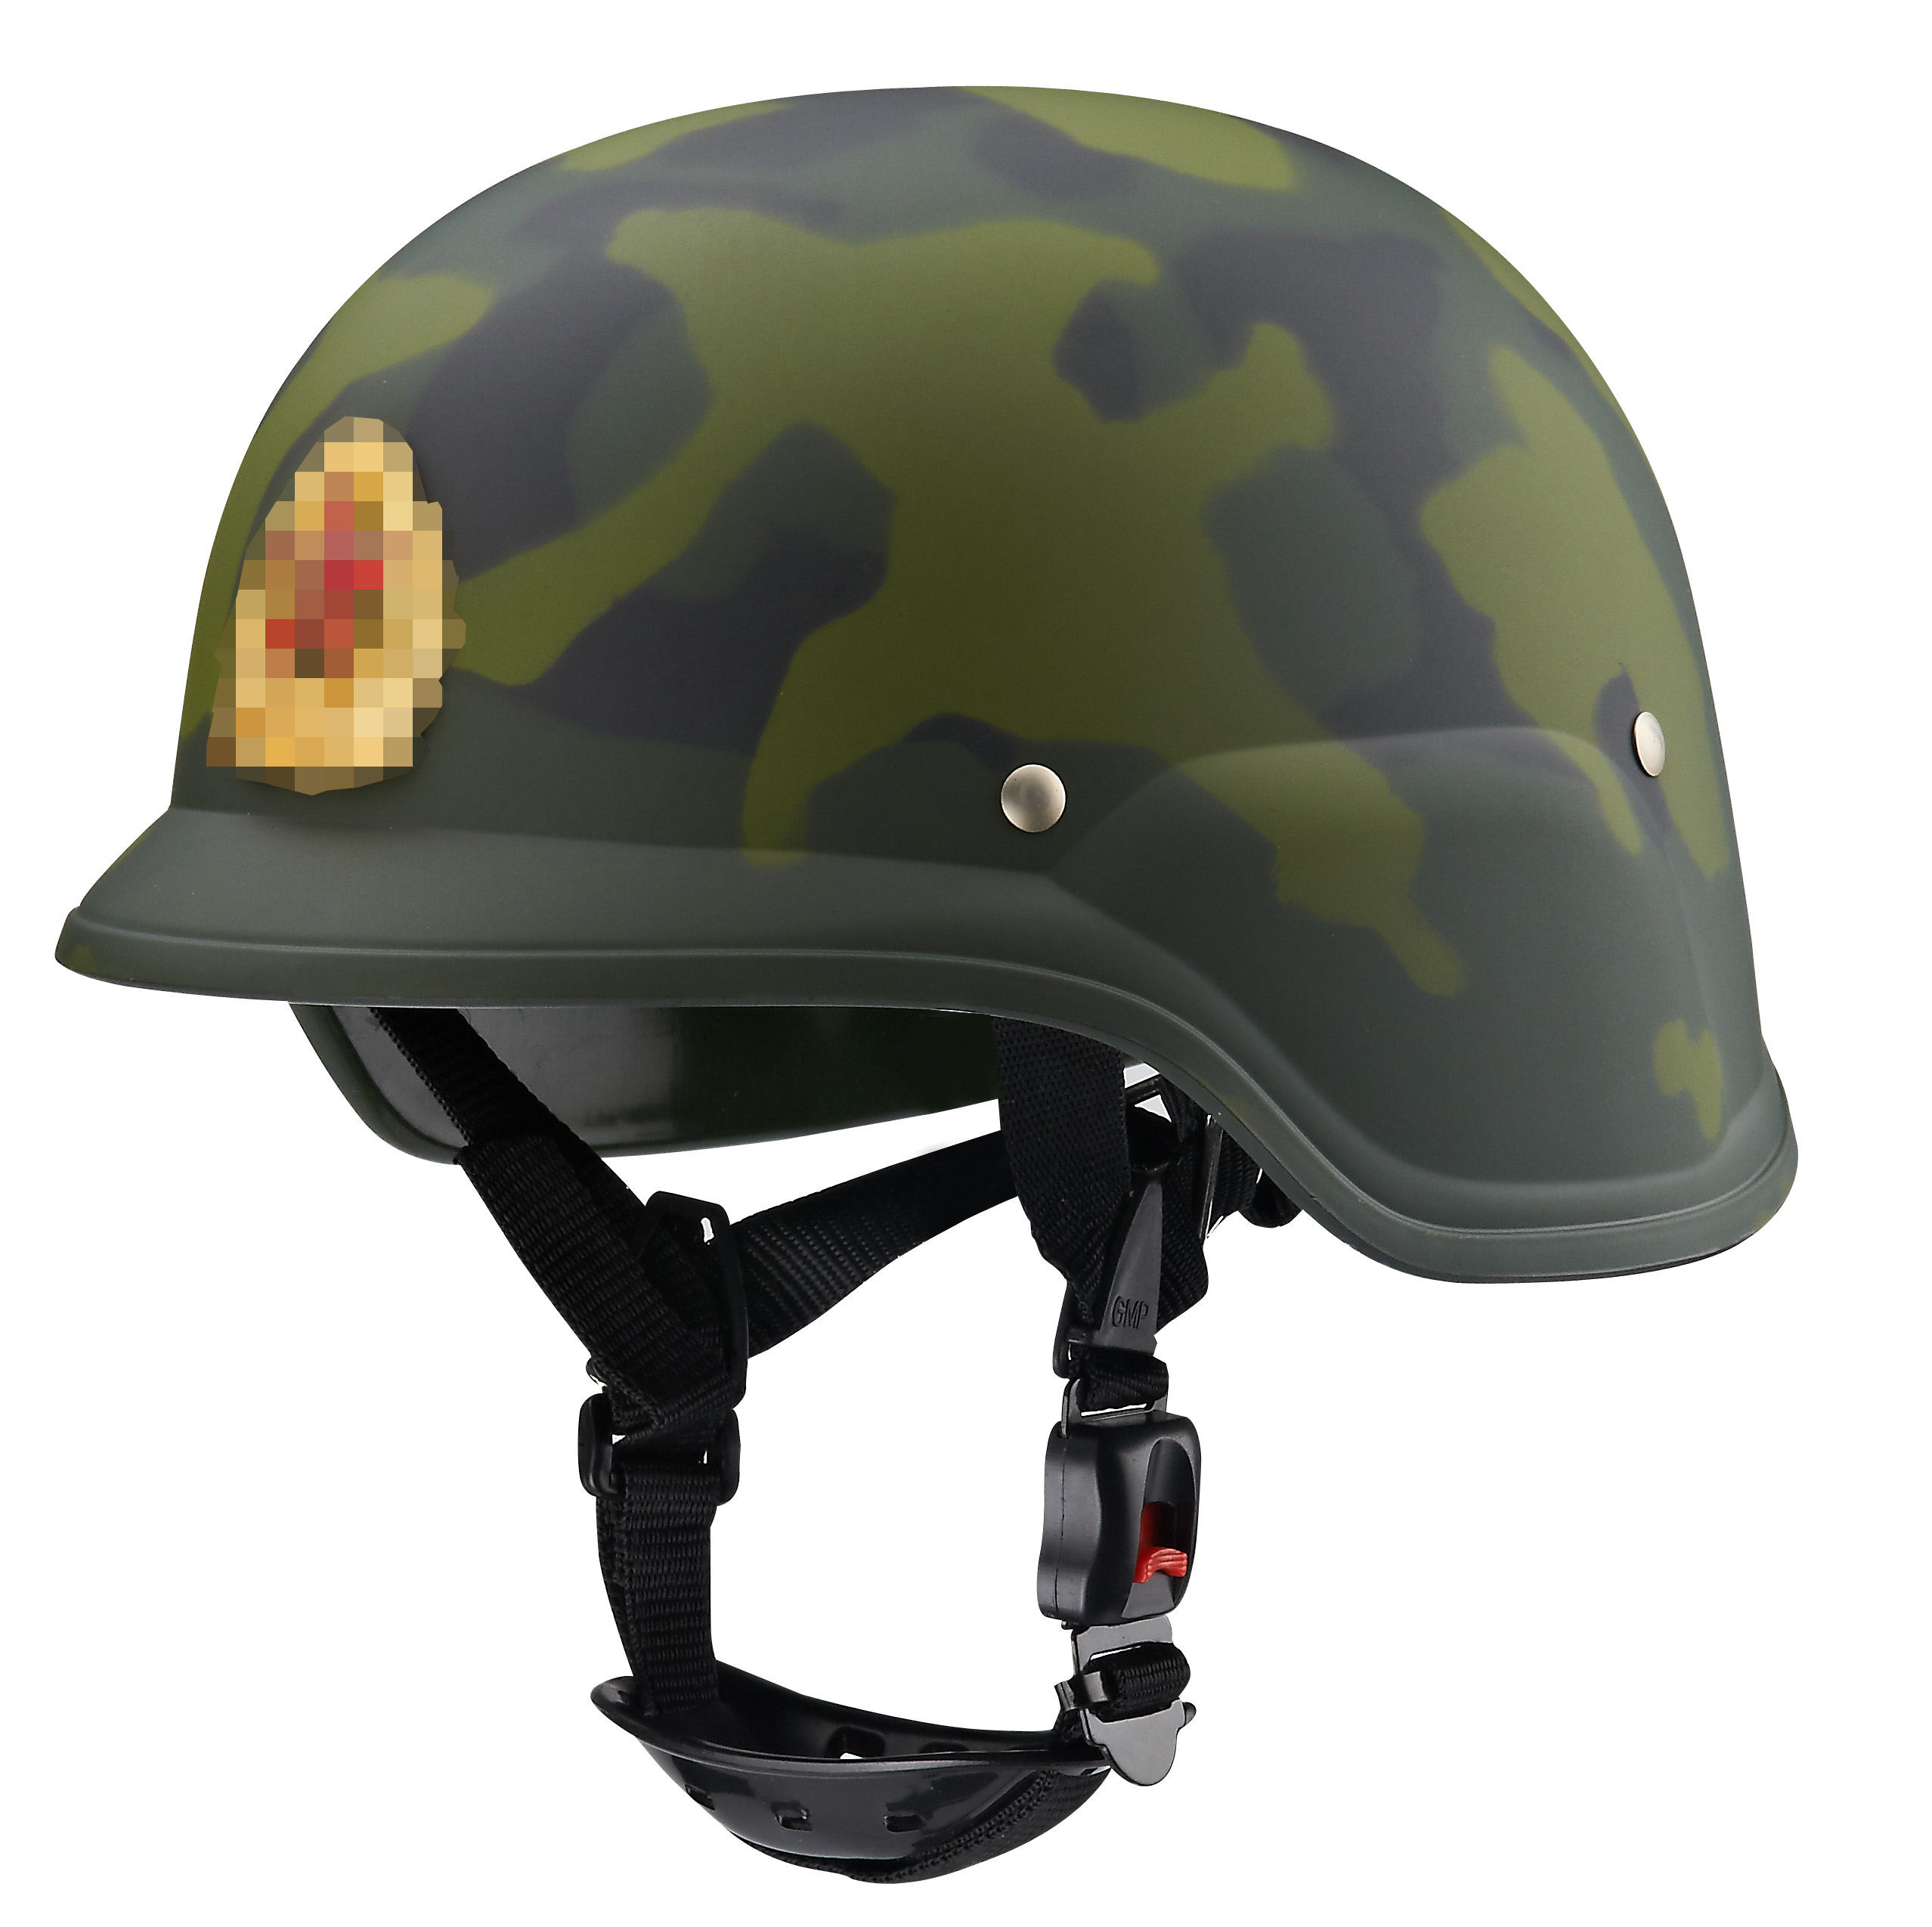 German Style Anti Riot Helmet for Military